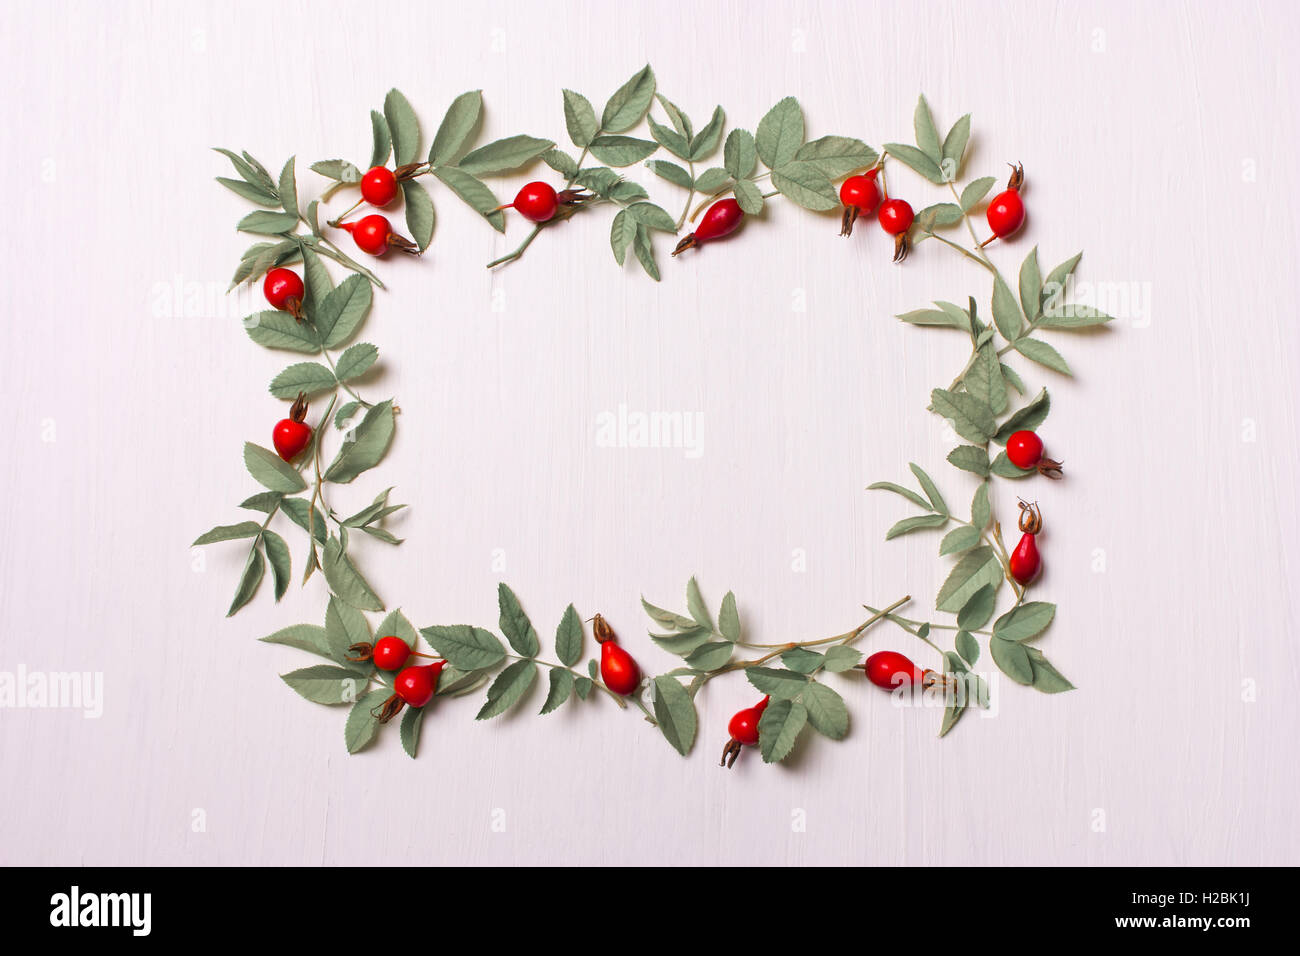 The square frame with leaves and red flowers, berries. top view. Stock Photo